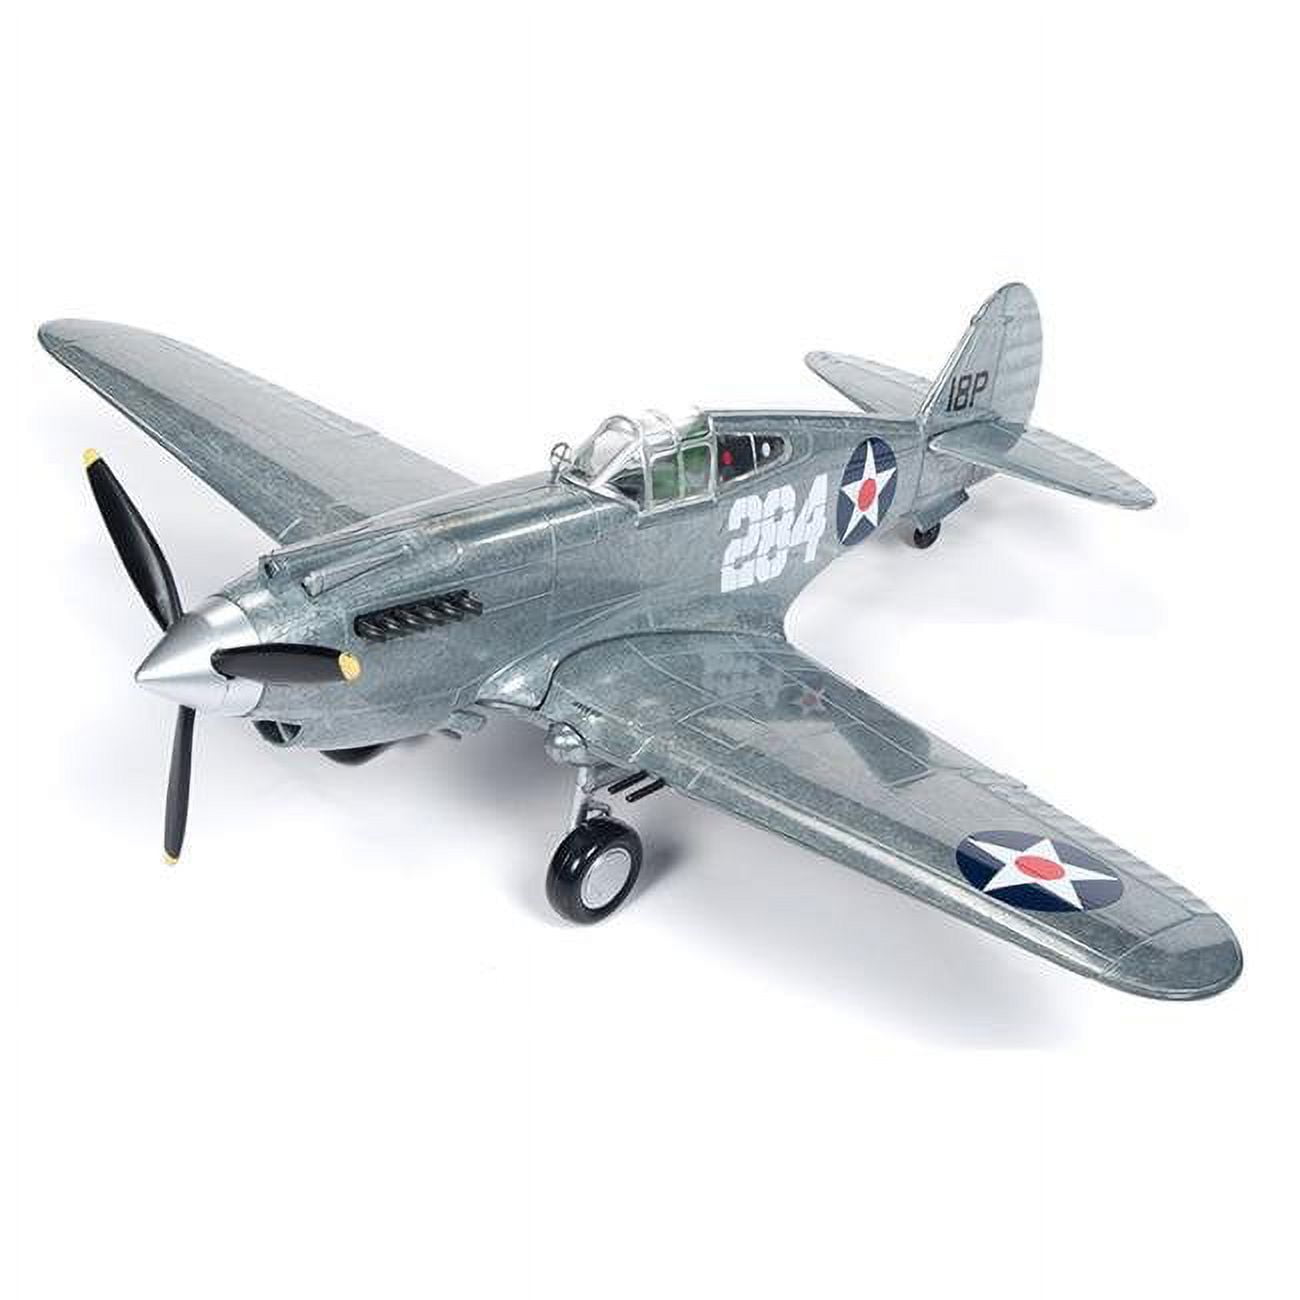 Roucp7563 Texaco Brushed Metal Special Edition 1941 Curtiss P-40b Tomahawk Plane - No. 2 2019 In The Fuel For Victory Series